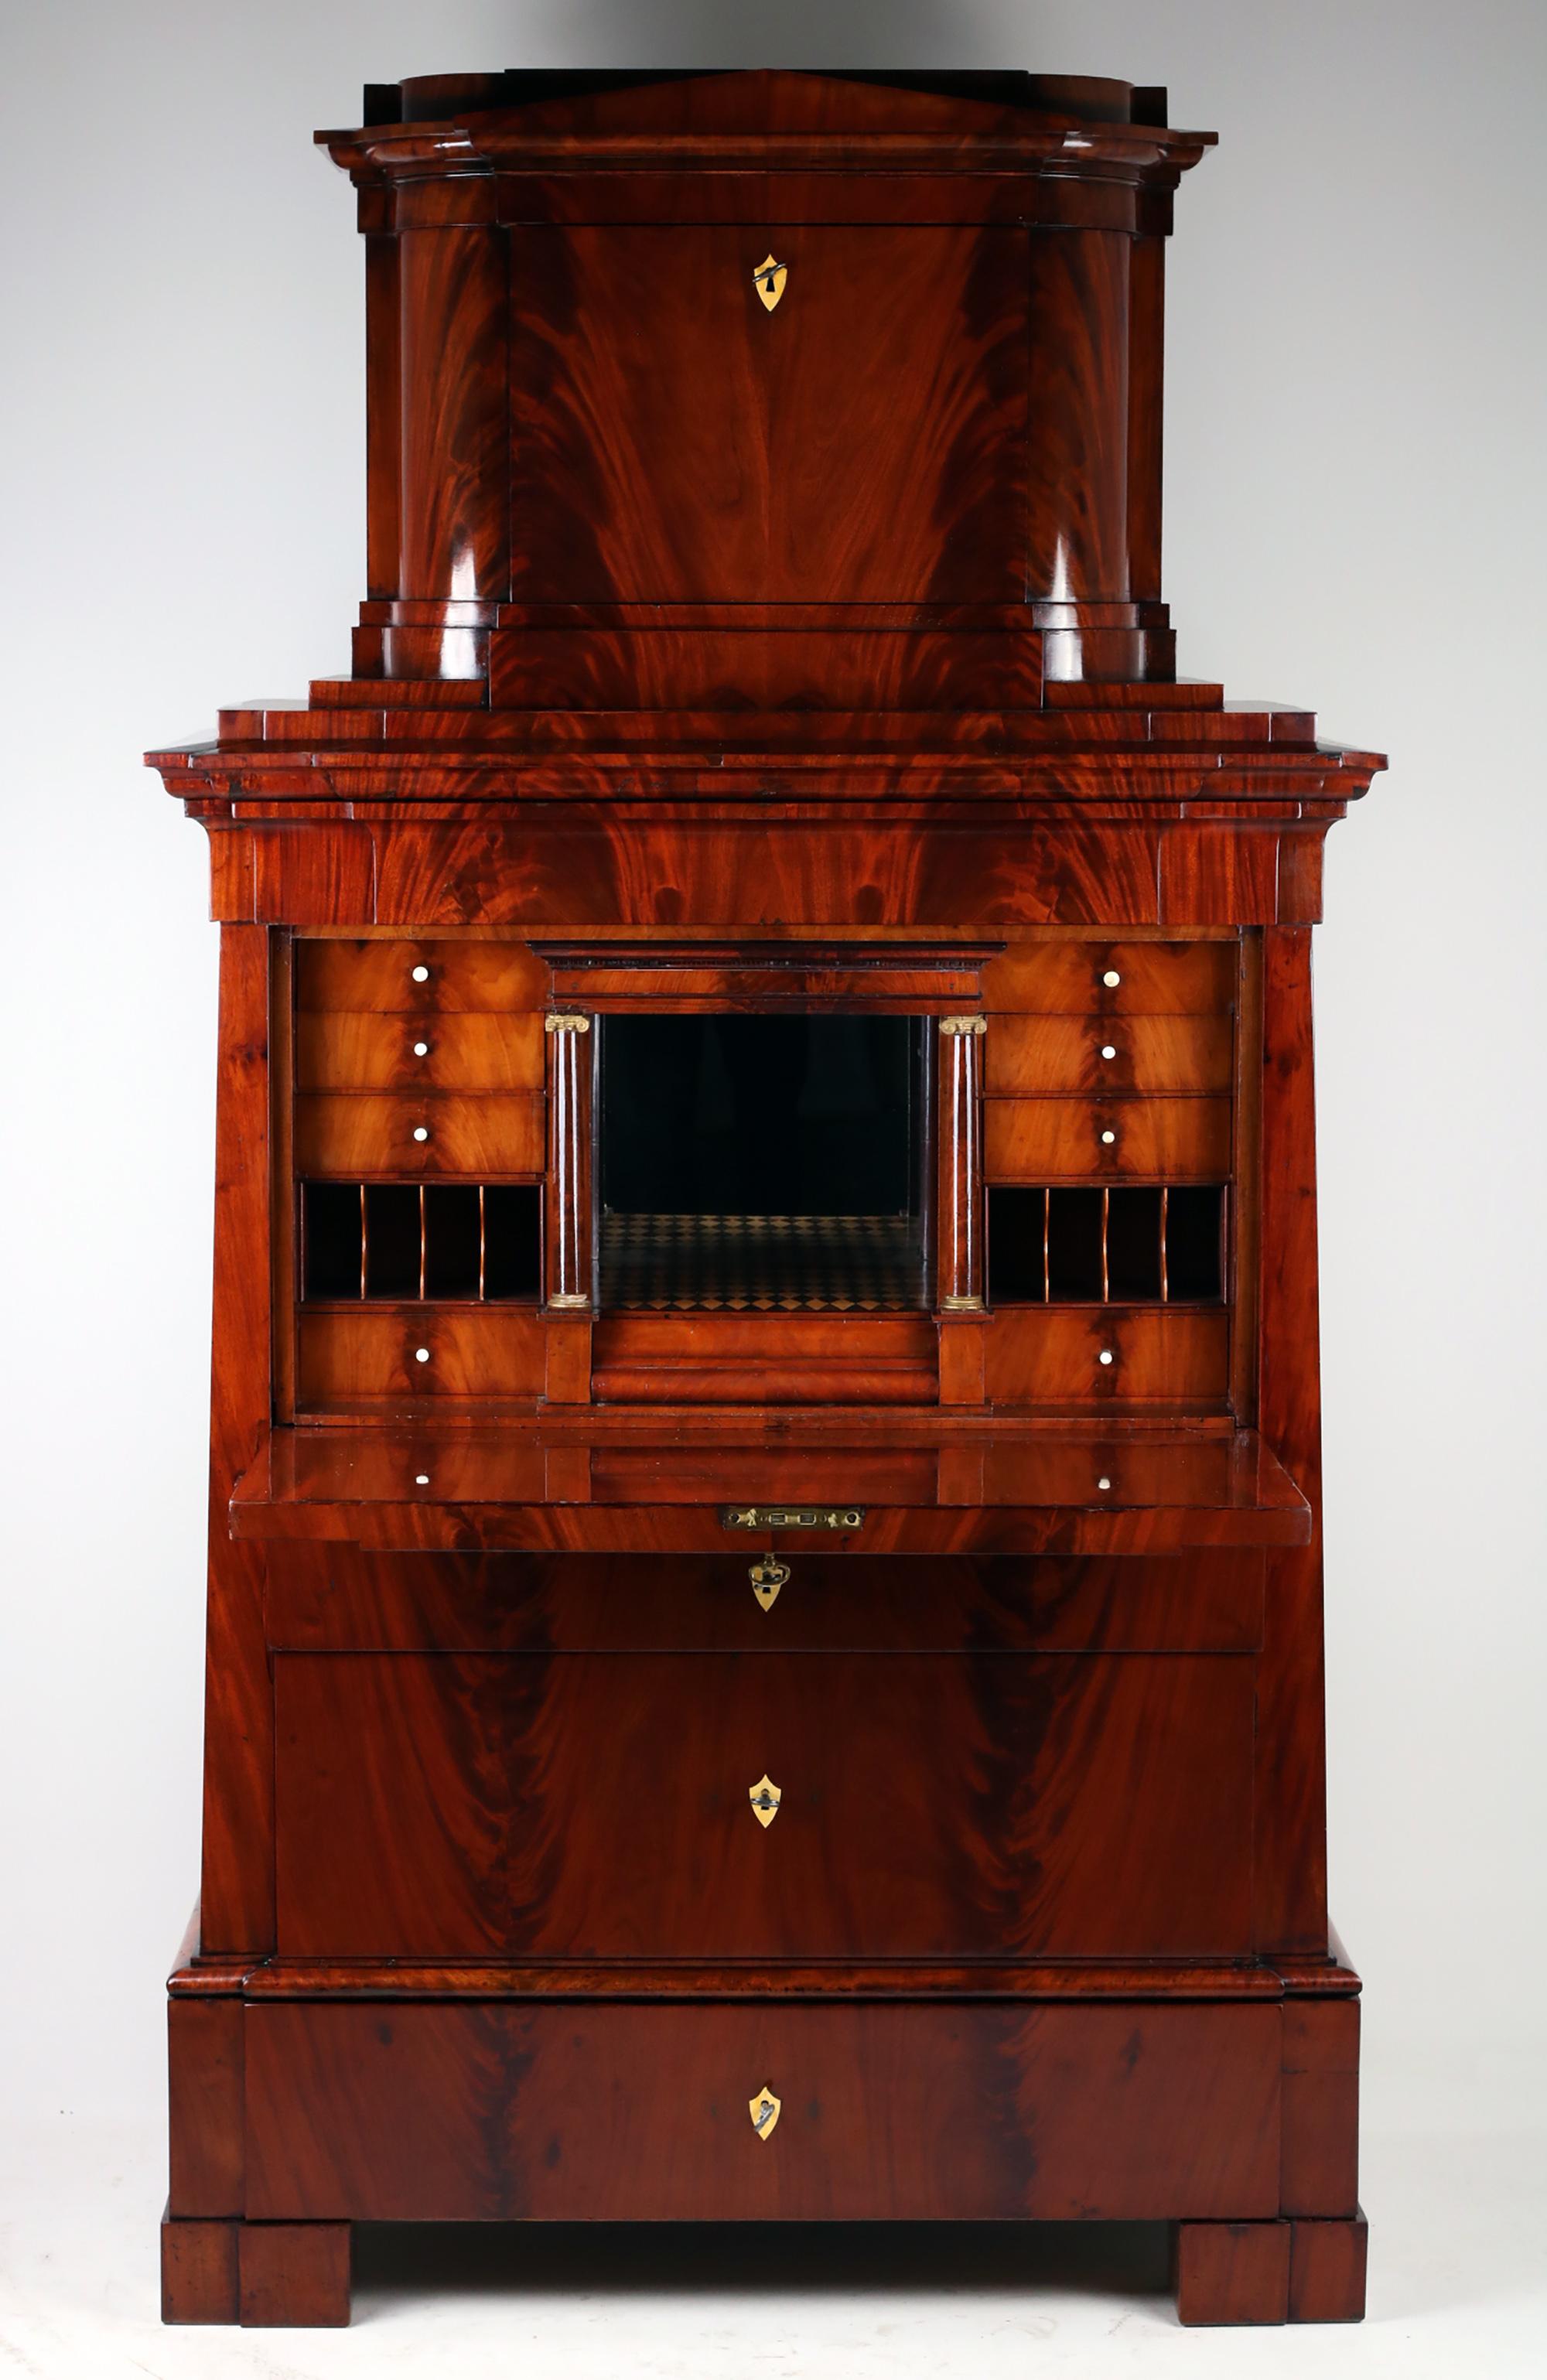 19th Century Conical Shape Secretary,
Germany, 1820

This fine Biedermeier secretary made of mahogany is a real gem for every lover of antique furniture. With a height of 194 cm, a width of 106 cm and a length of 52 cm, it offers plenty of storage